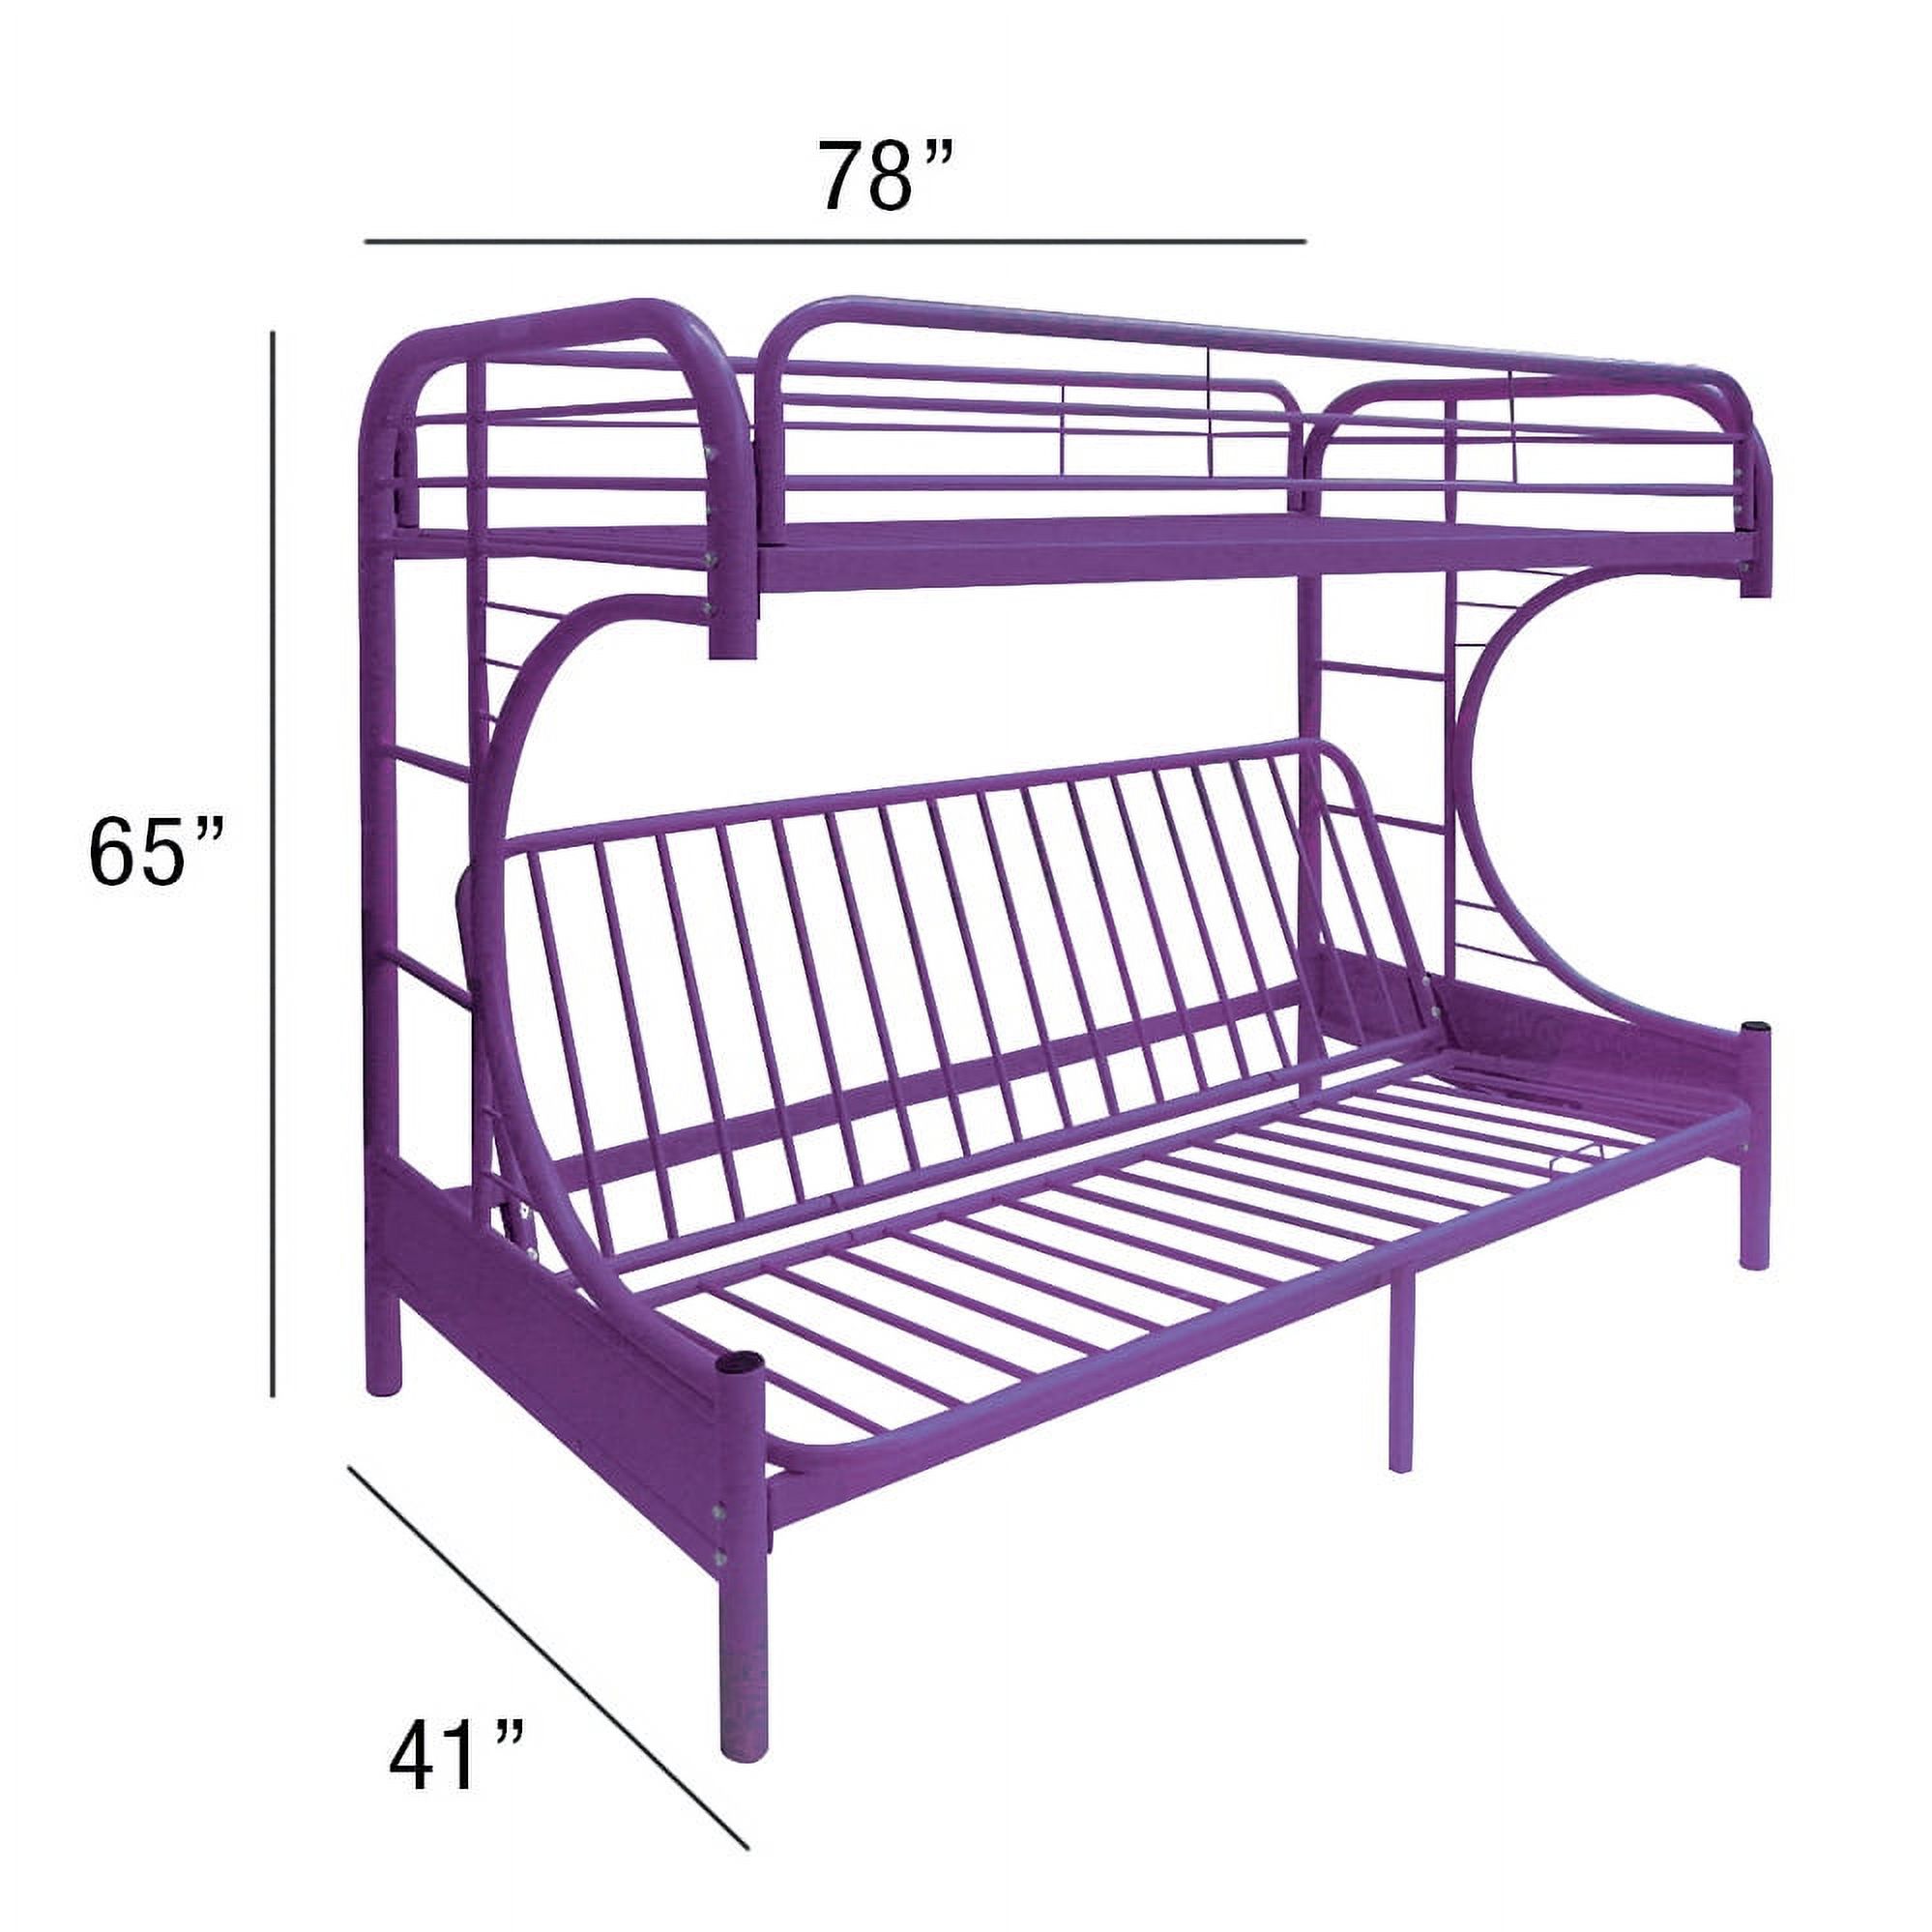 ACME Furniture Eclipse Twin over Full and Futon Bunk Bed in Purple - image 2 of 5